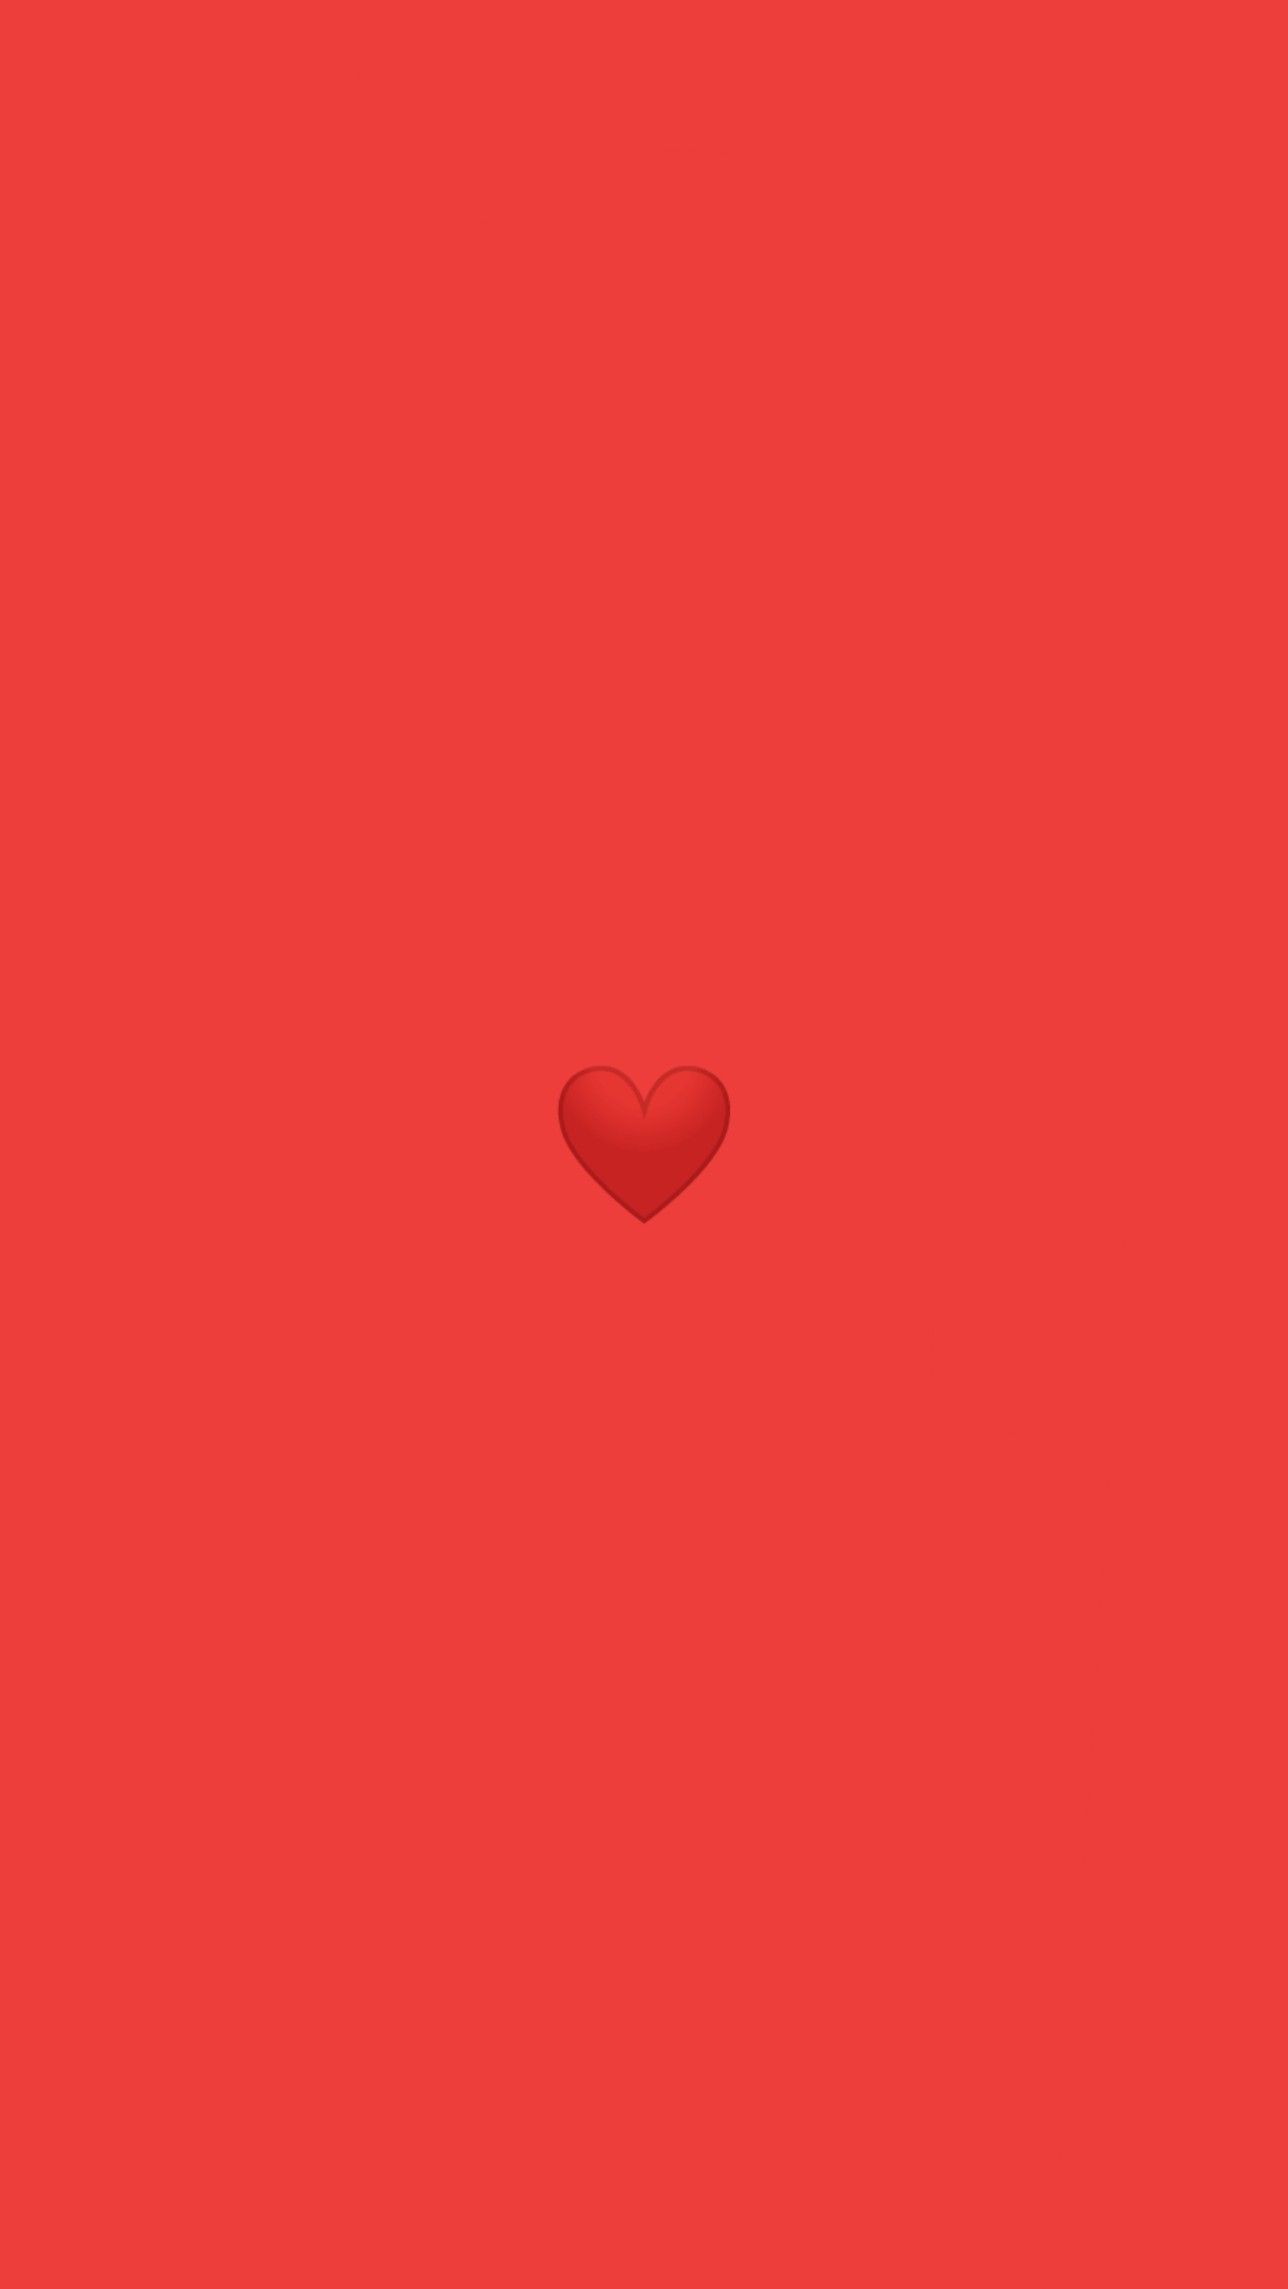 A red background with a small red heart in the middle - Emoji